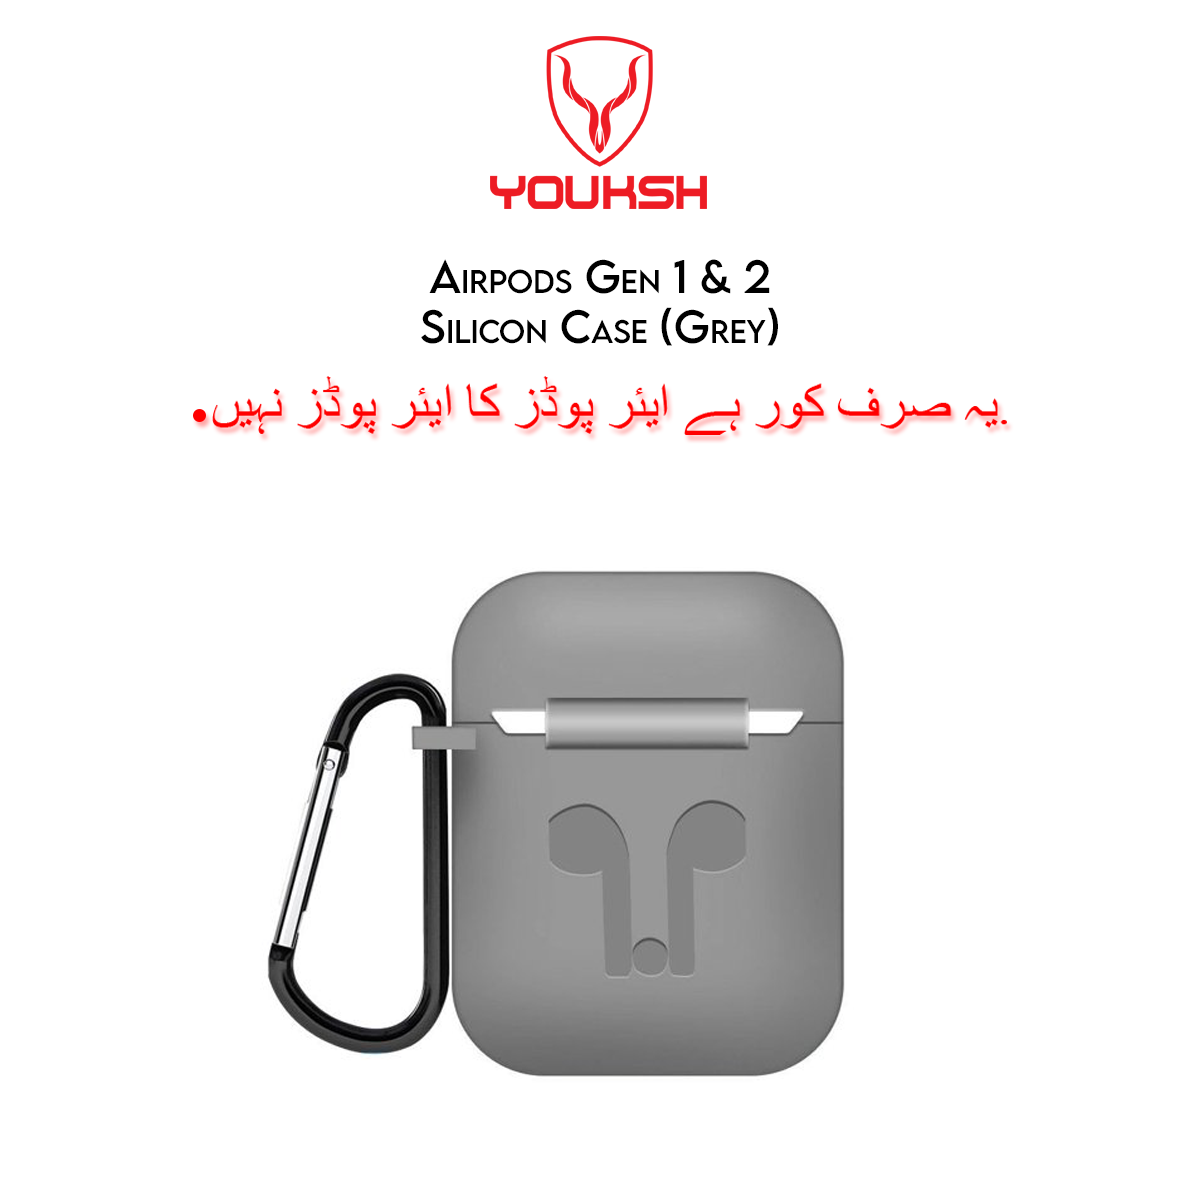 YOUKSH Apple Airpods (Series 1 & 2) Silicone Case - Apple Airpods (Series 1 & 2) Silicone Case - Airpods (Series 1 & 2) Silicone Rubber Cover - High Quality Shock Proof Case Only.